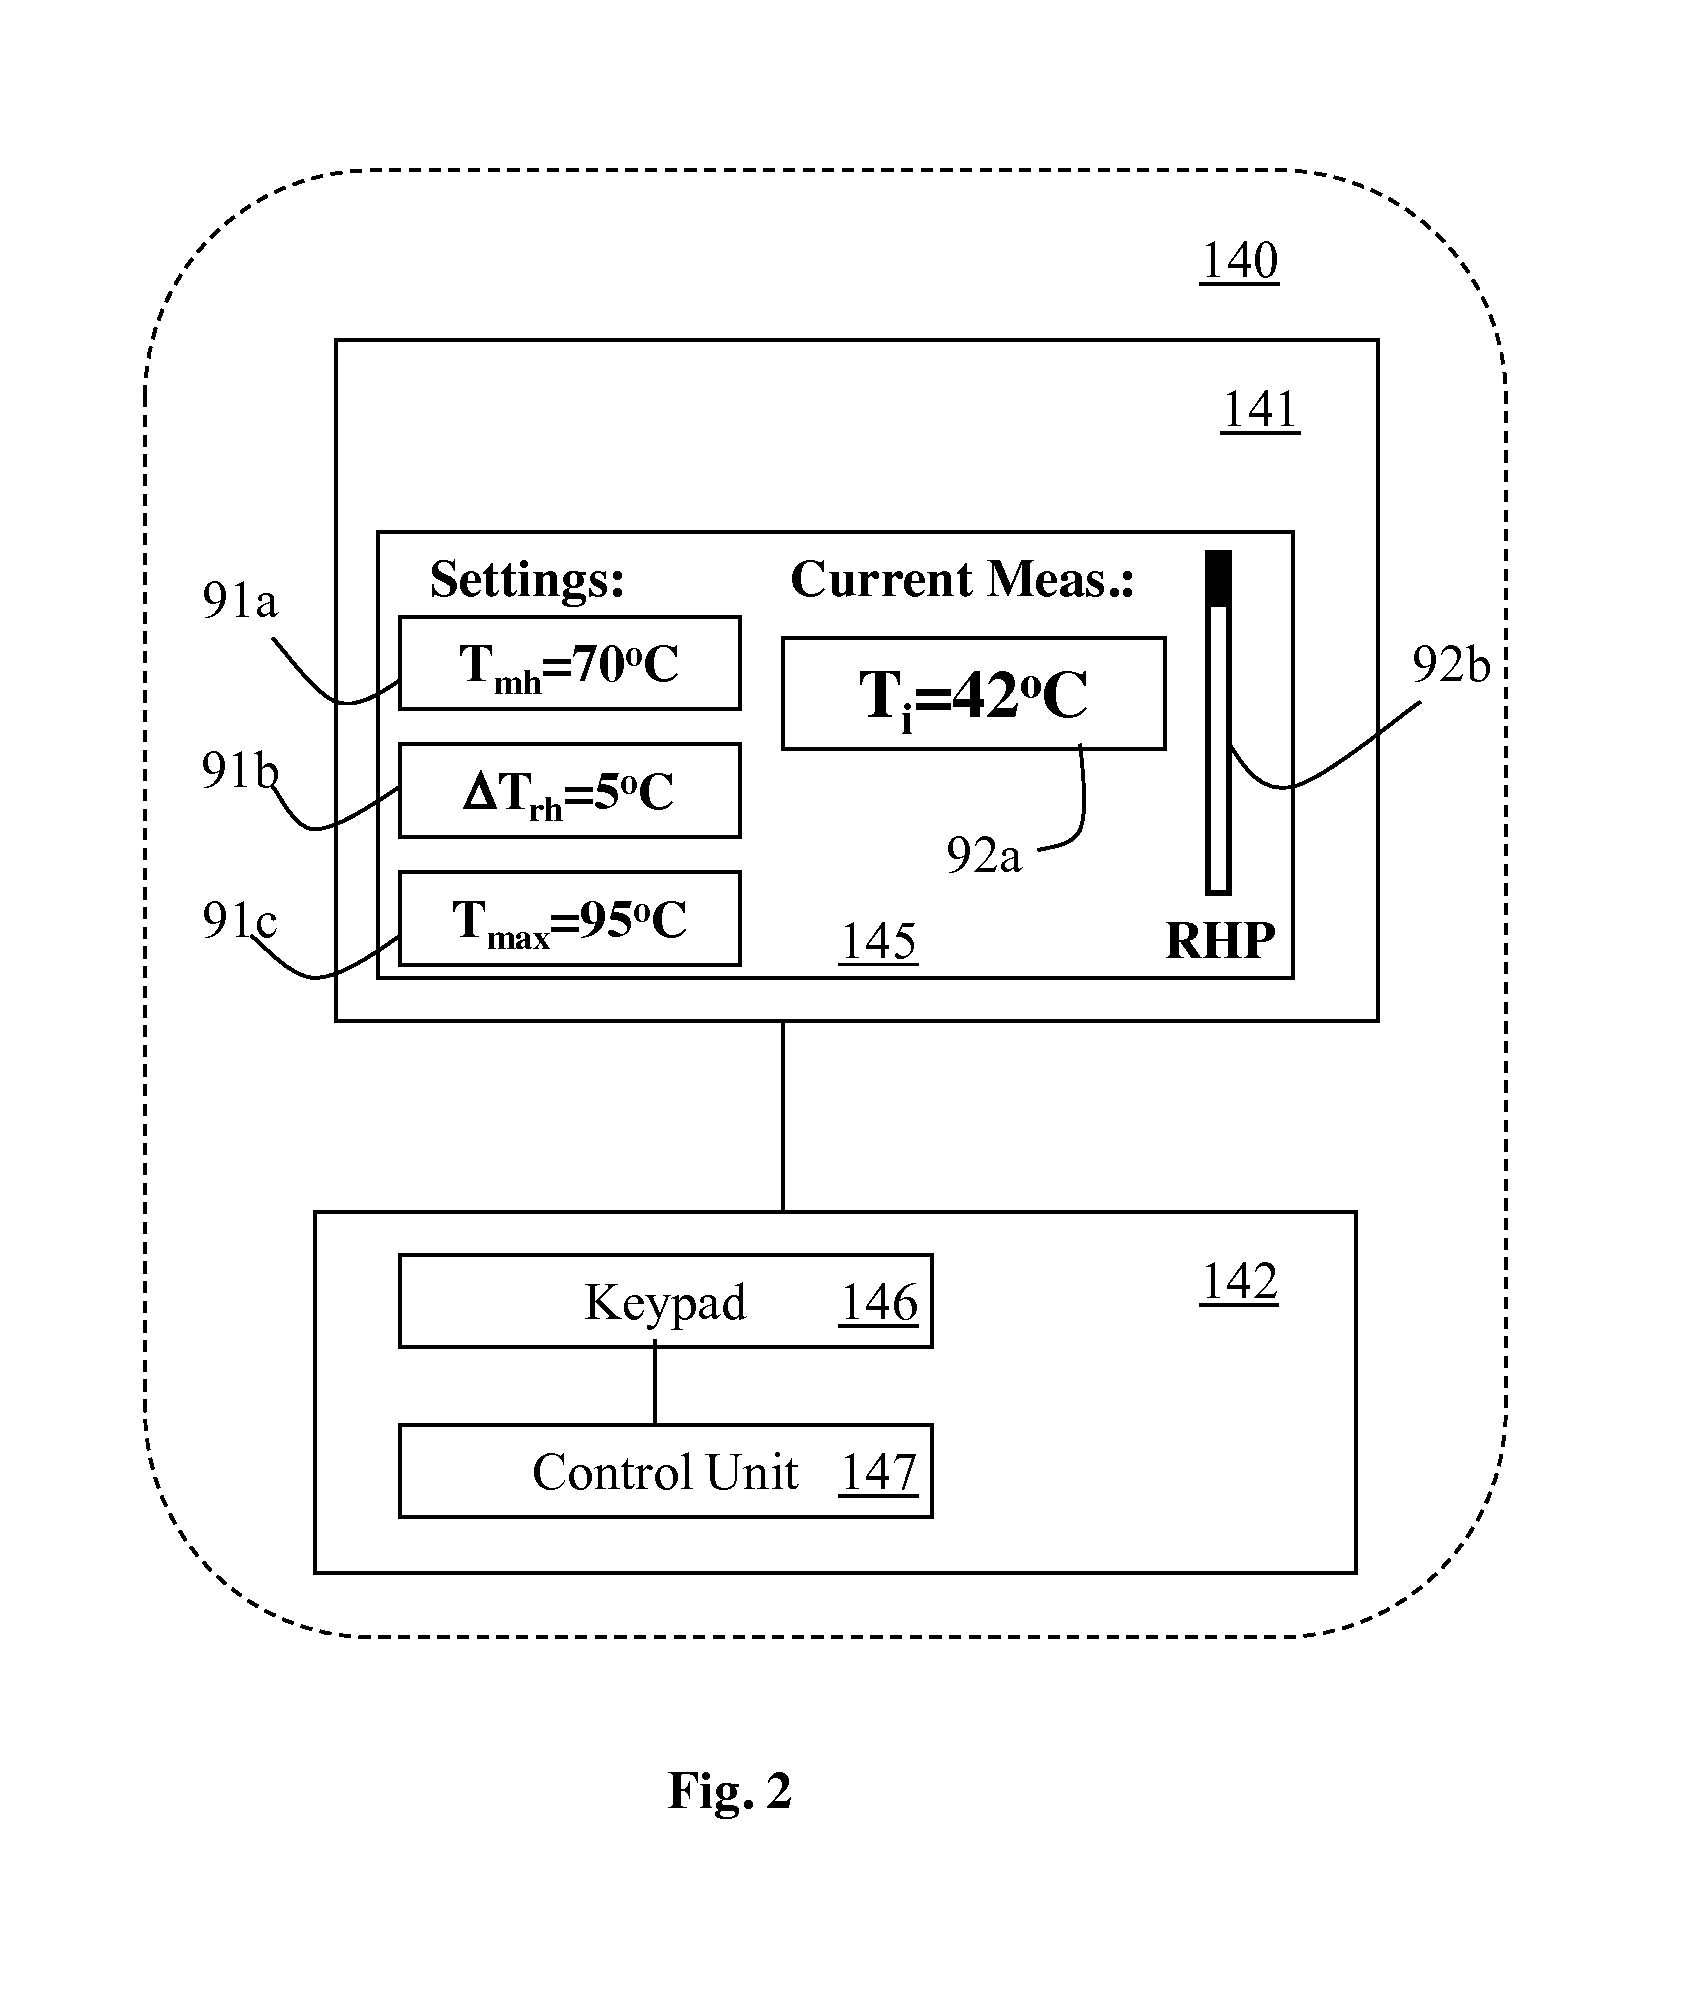 System and method for monitoring and controlling heating/cooling systems